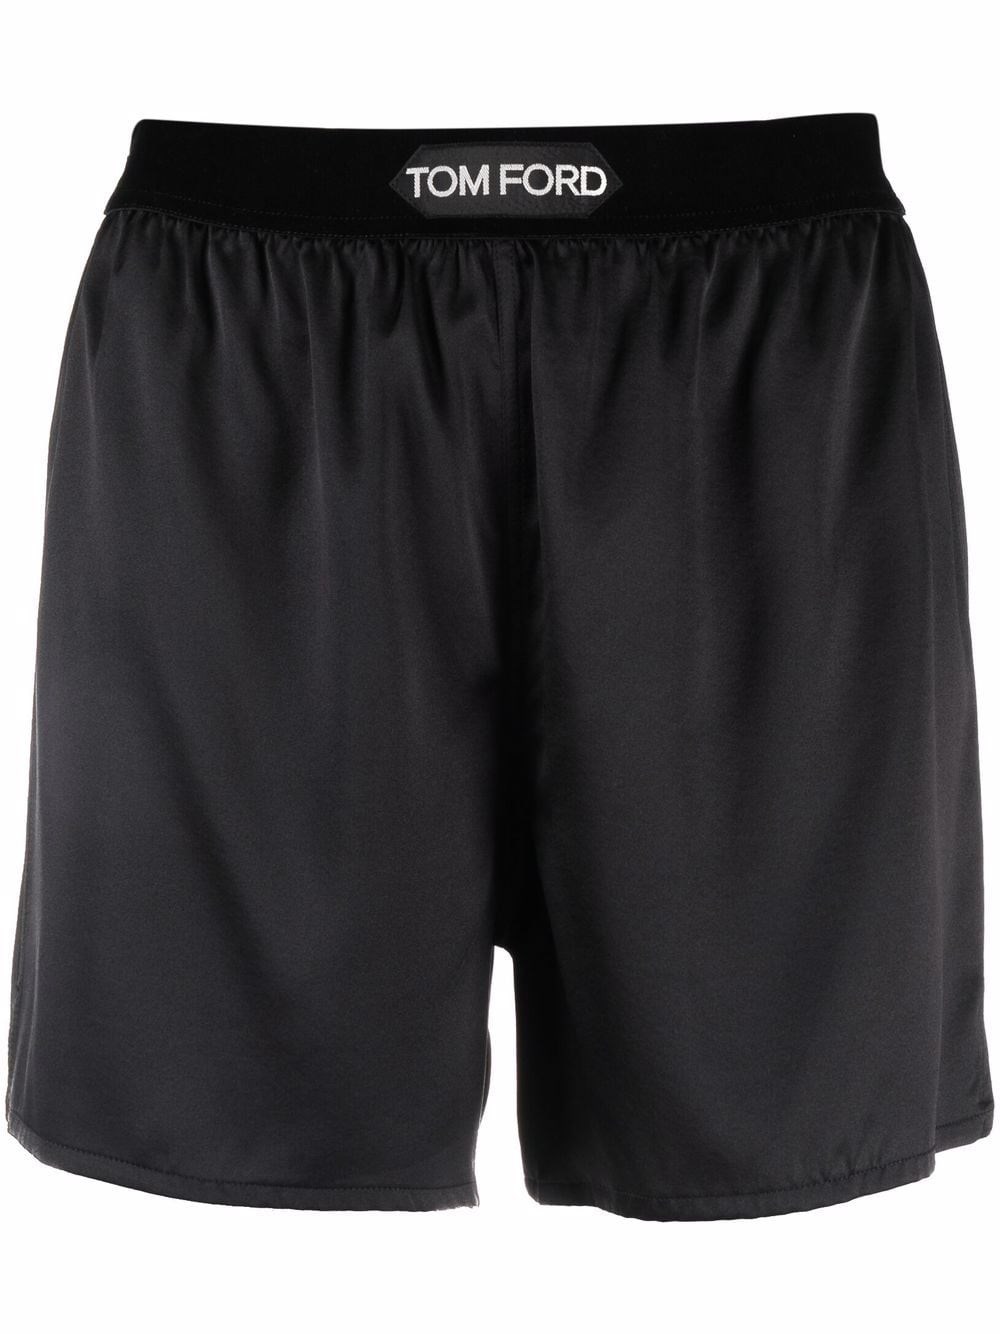 tom ford SHORTS available on montiboutique.com - 45133